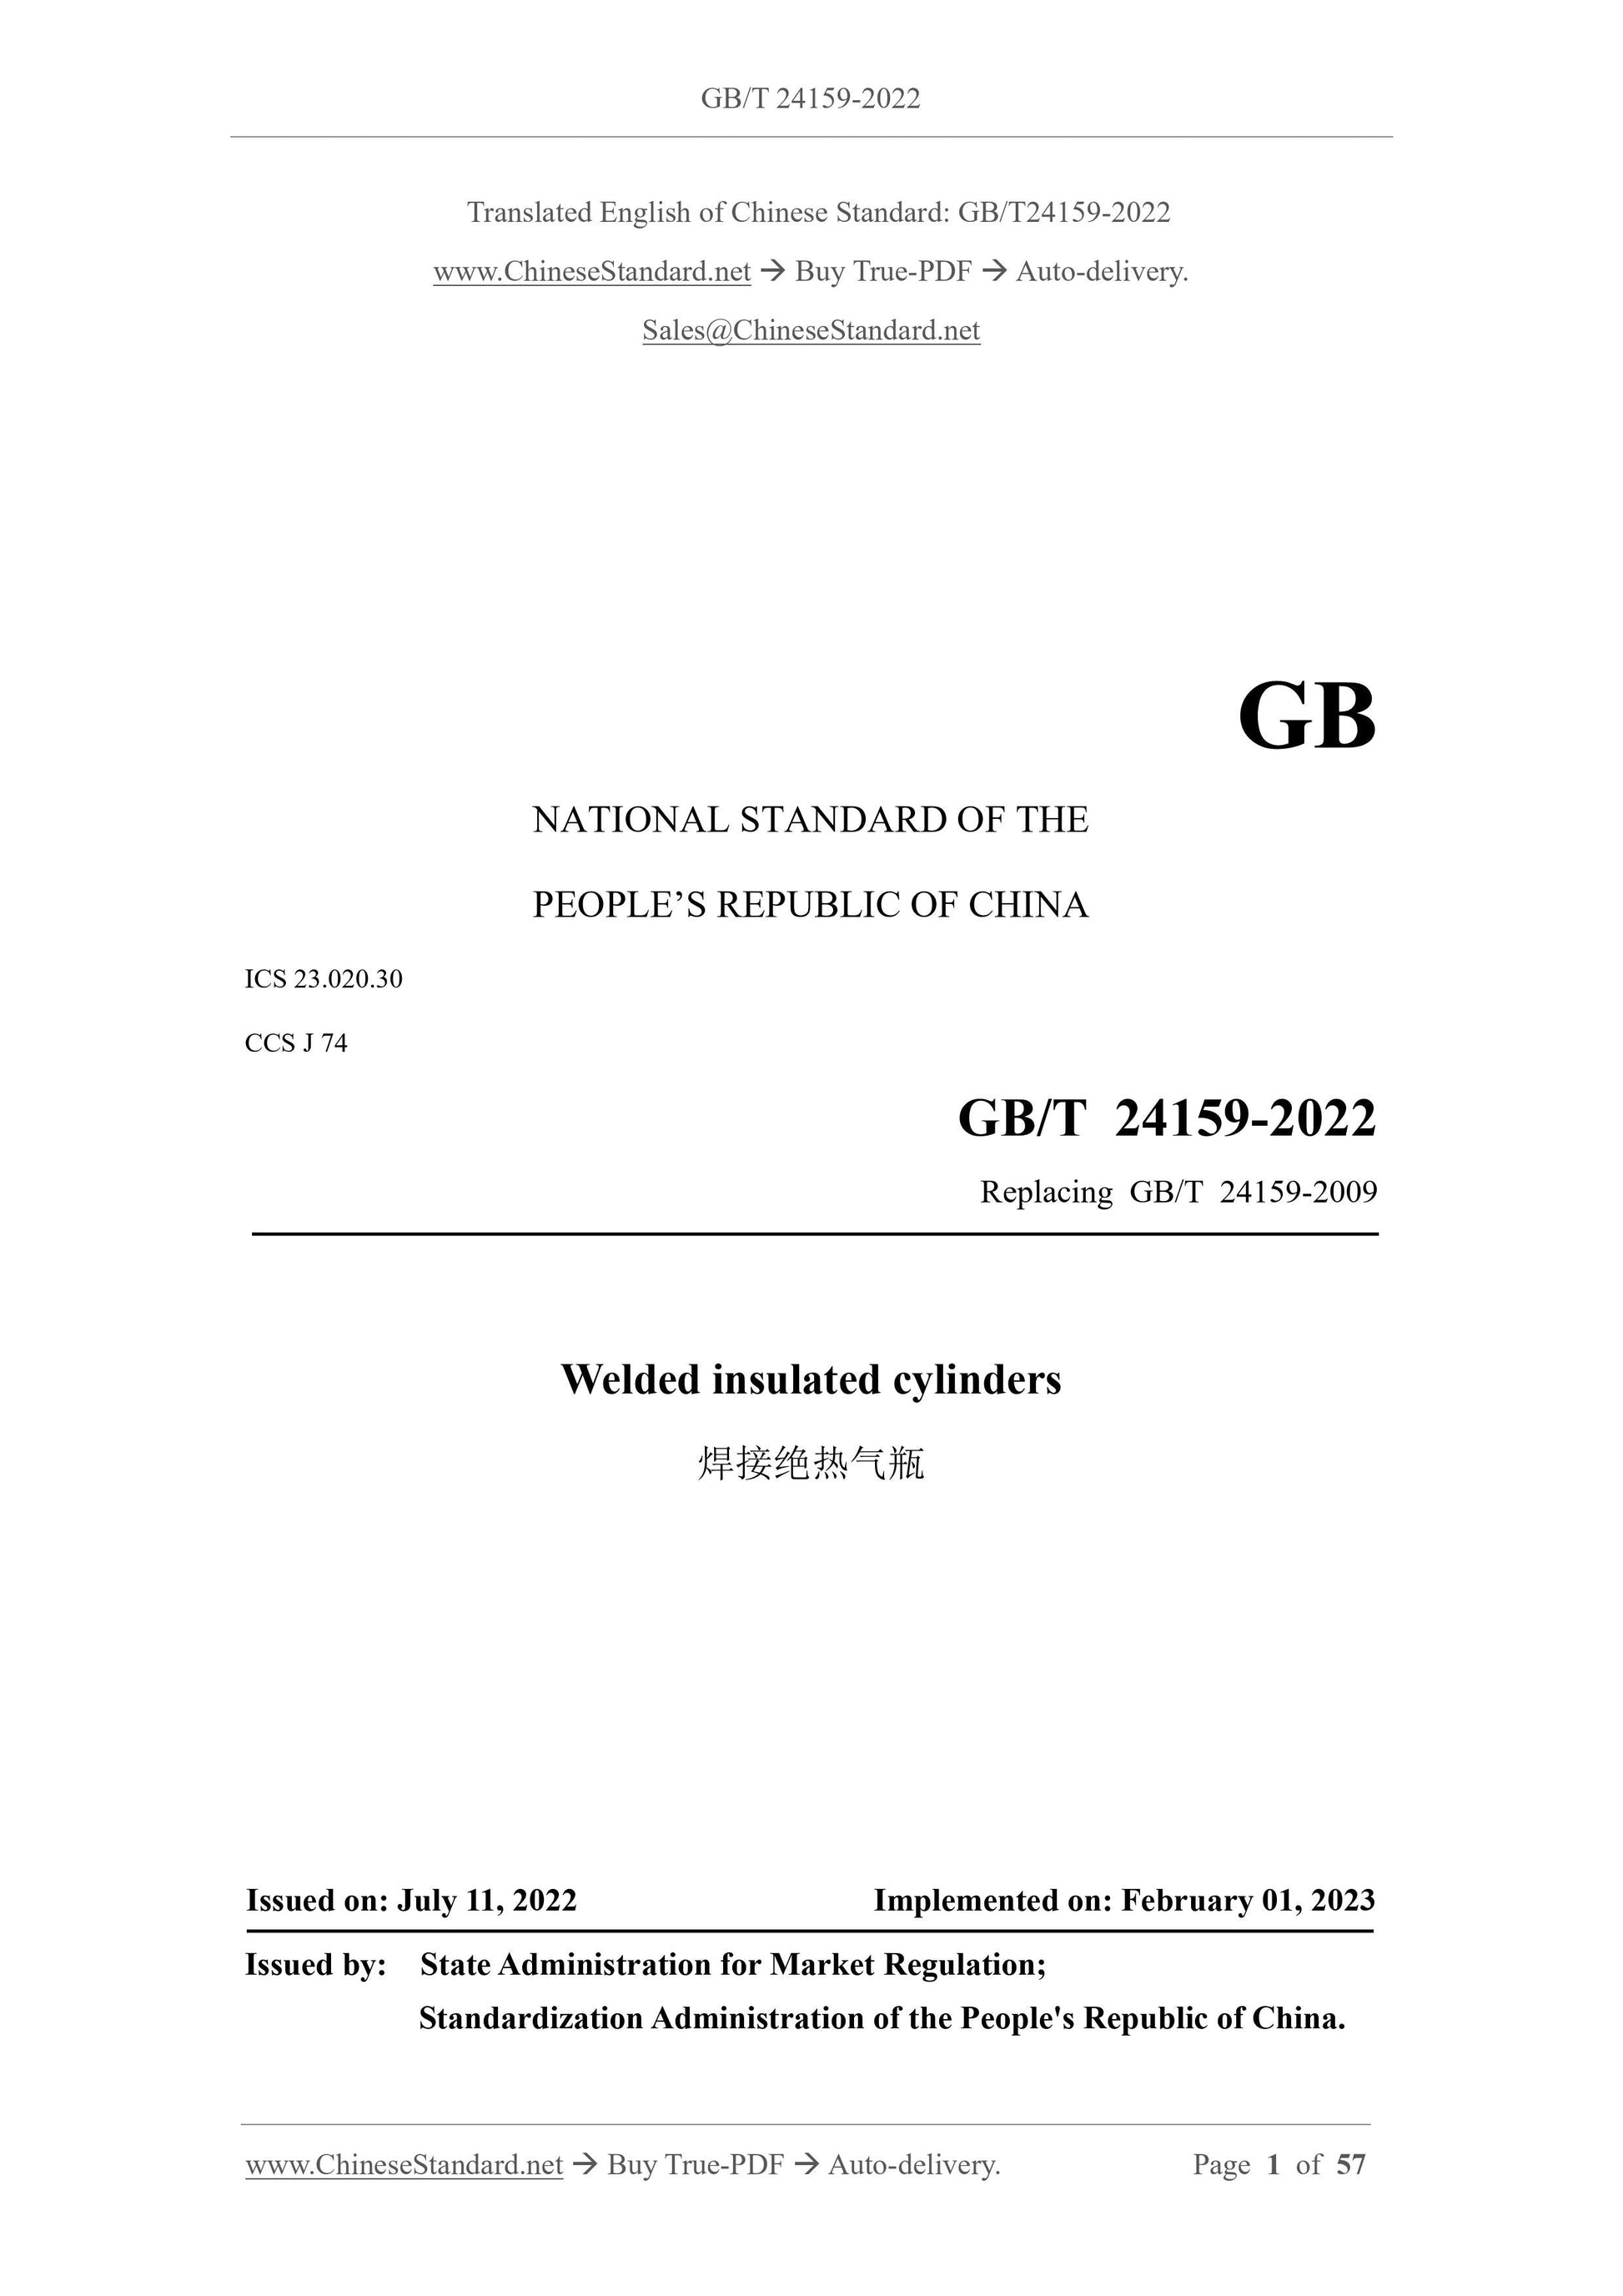 GB/T 24159-2022 Page 1